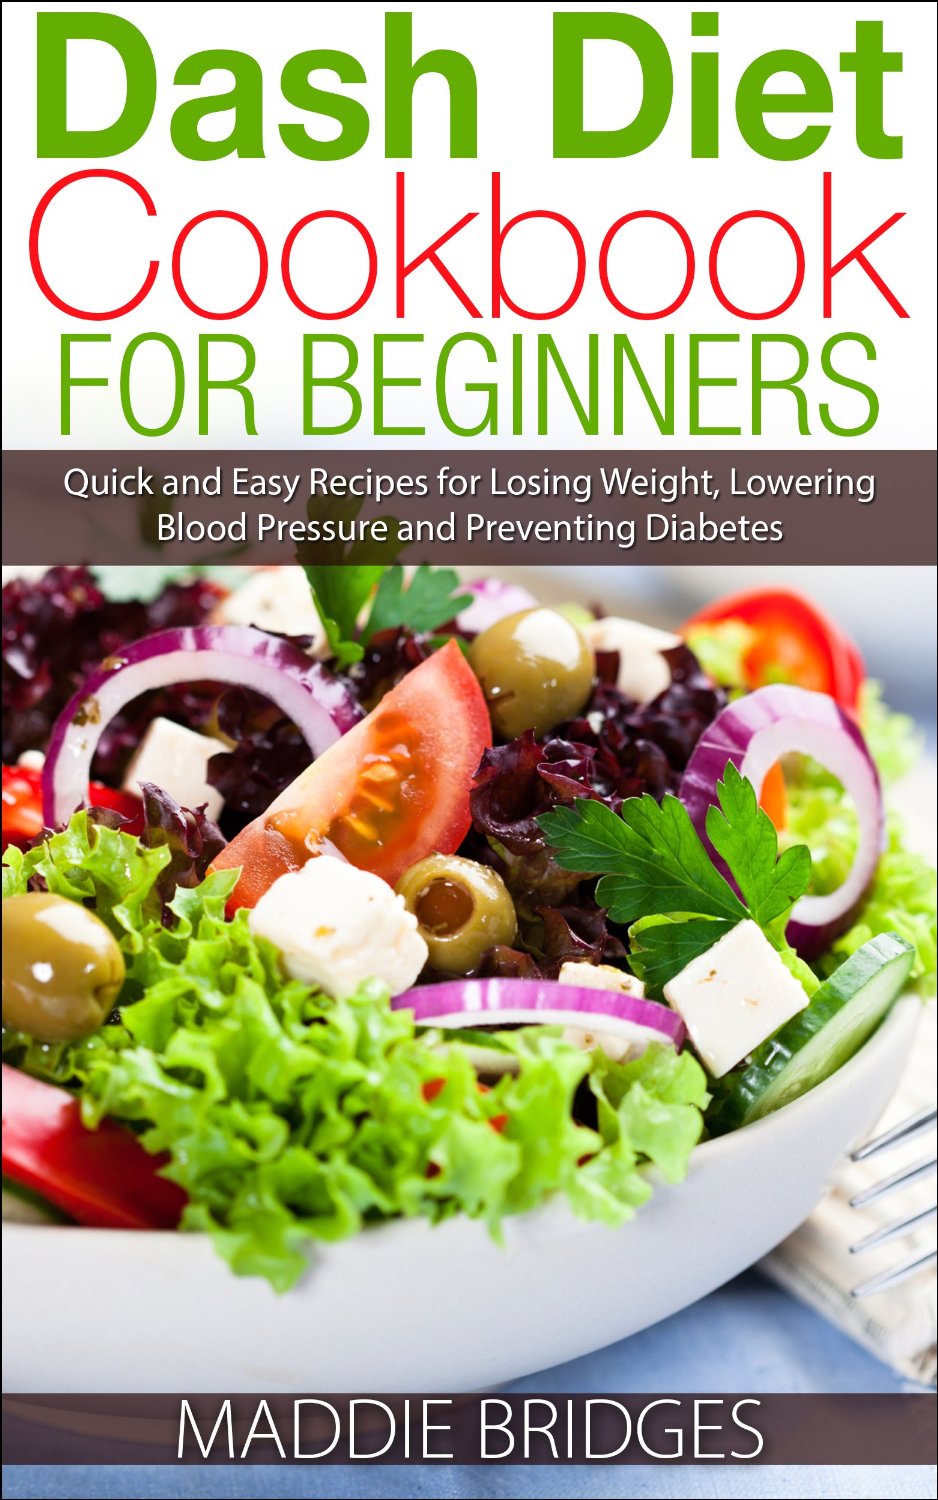 Dash Diet Cookbook for Beginners: Quick and Easy Recipes for Losing Weight, Lowering Blood Pressure and Preventing Diabetes by Maddie Bridges